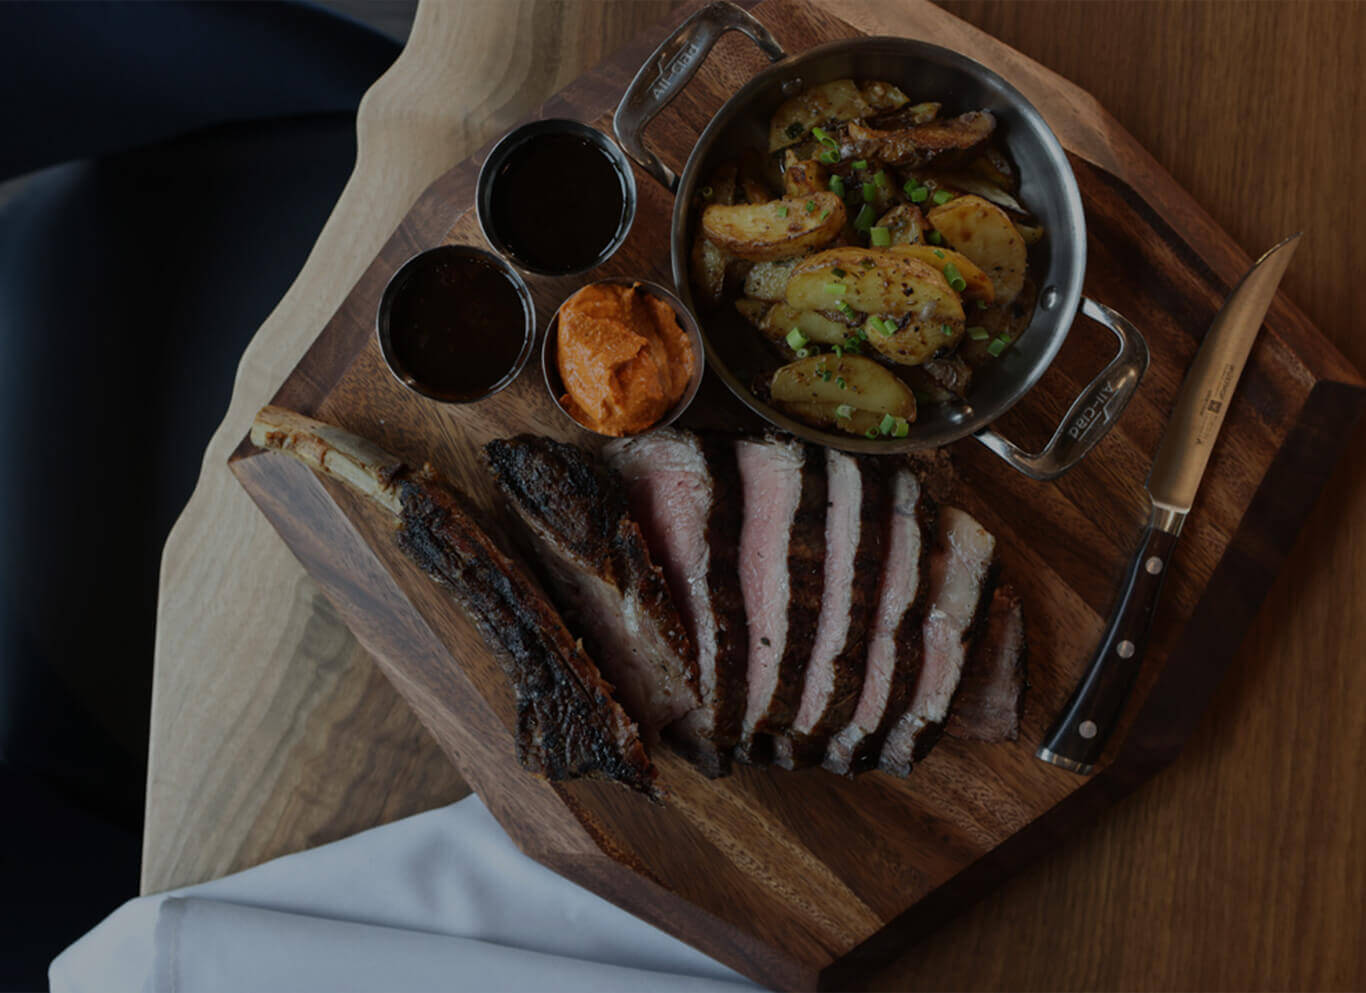 Cleaver and Cocktail restaurant steak cut up on wooden board